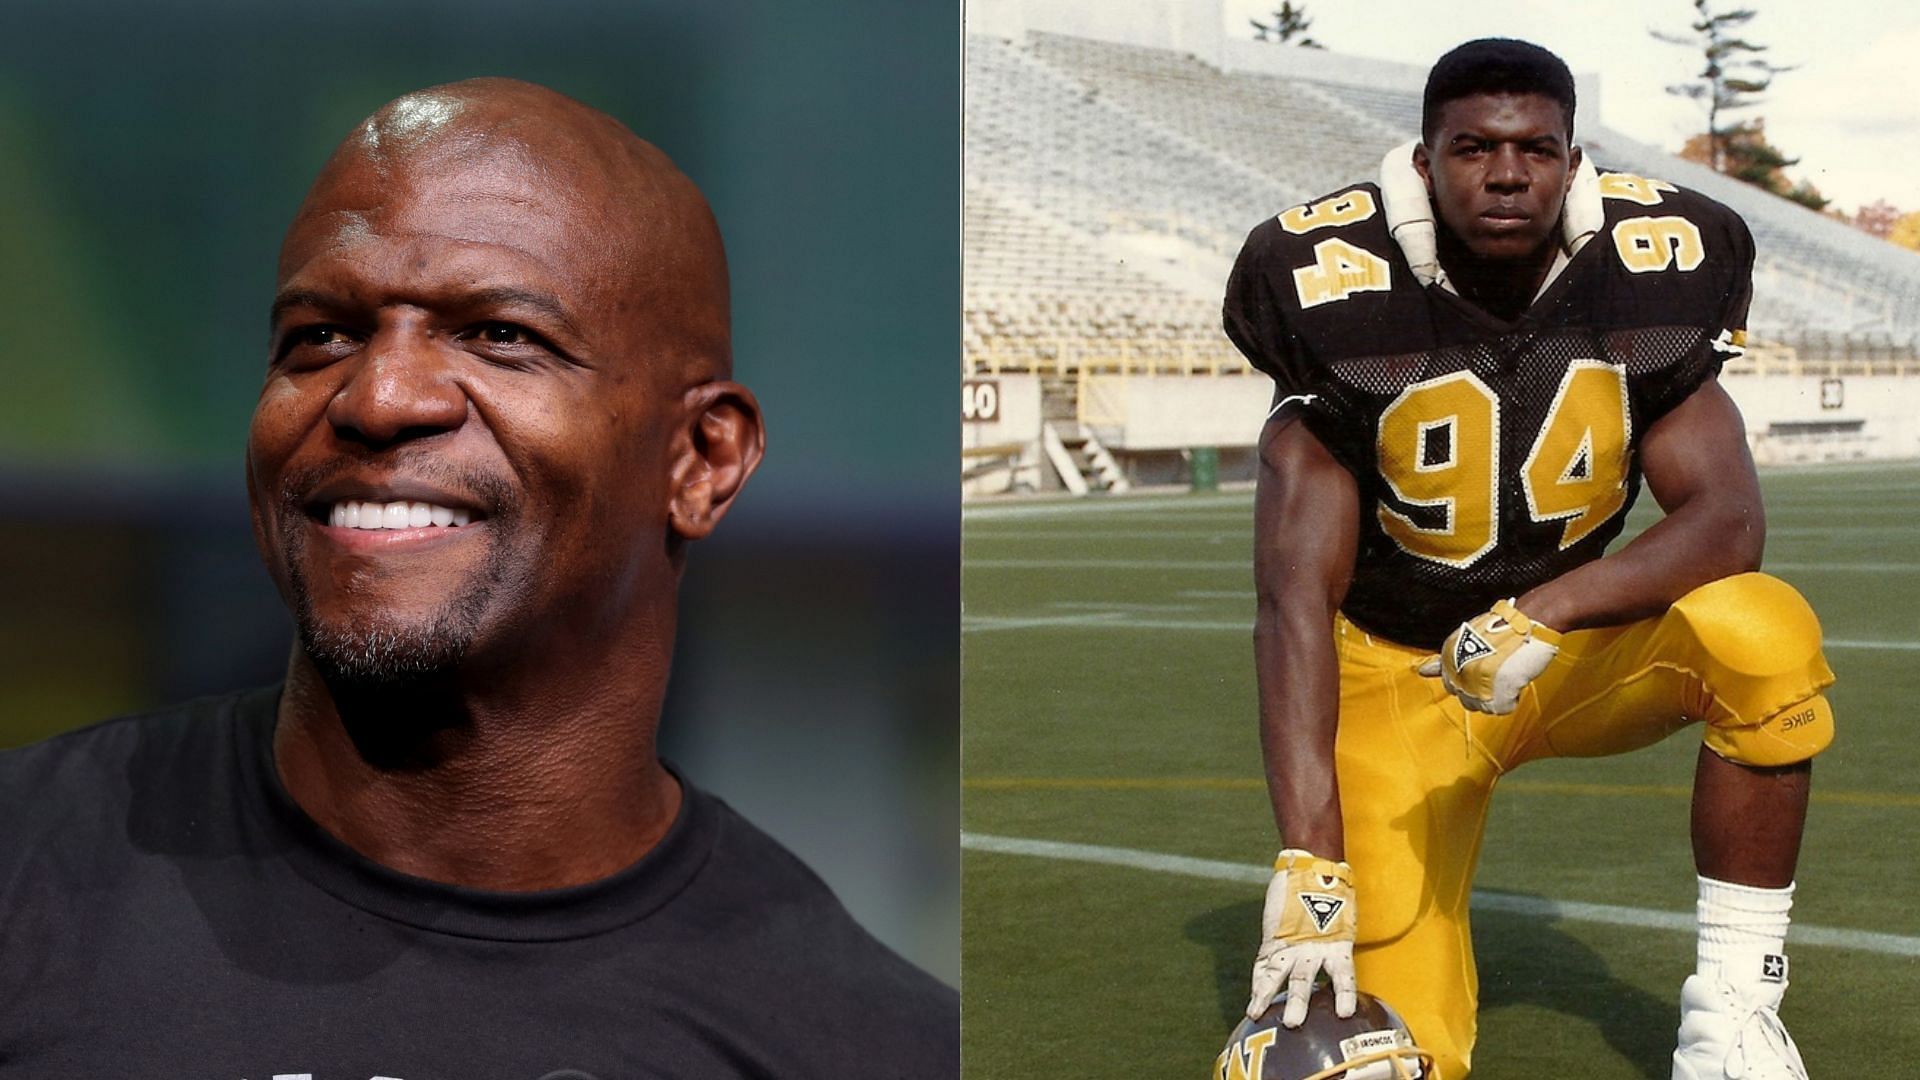 Actor Terry Crews spoke on his personal experience with the NFL Draft